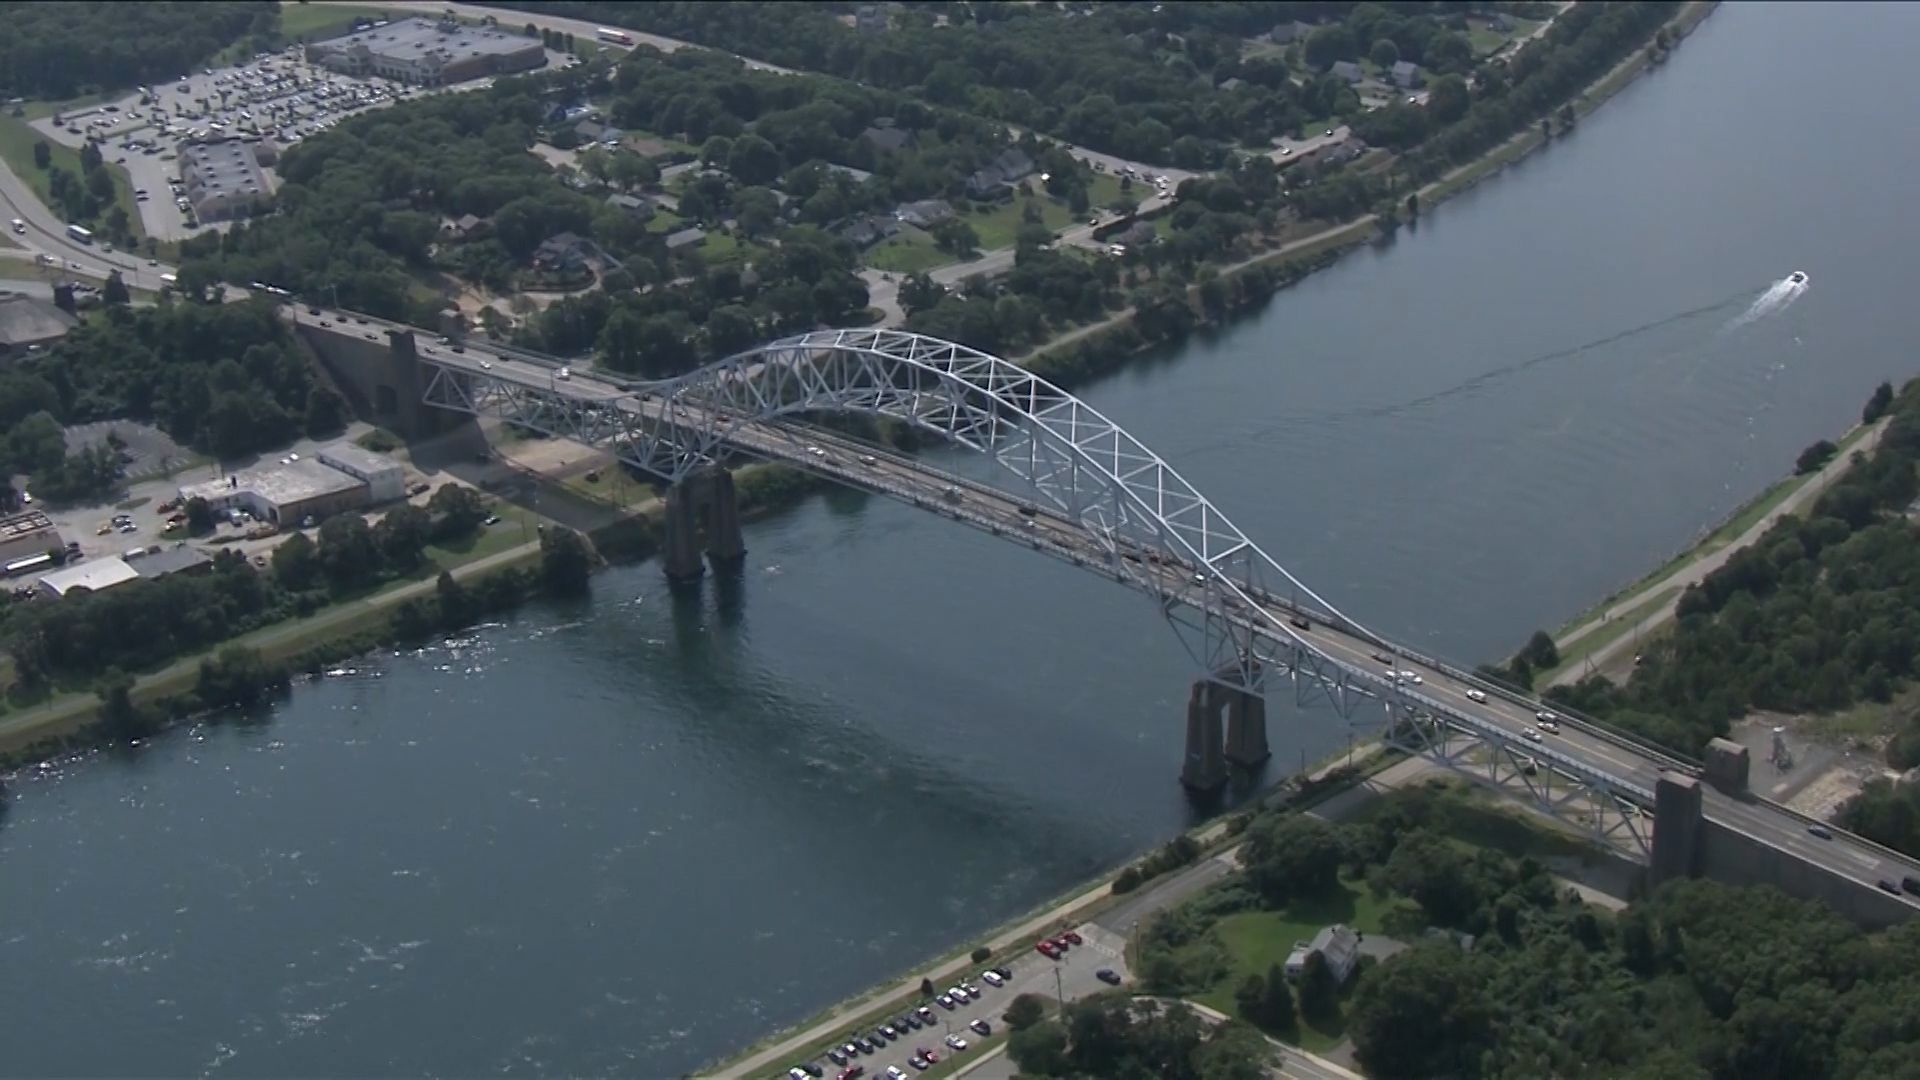 Healey plans to build new Sagamore Bridge before replacing Bourne